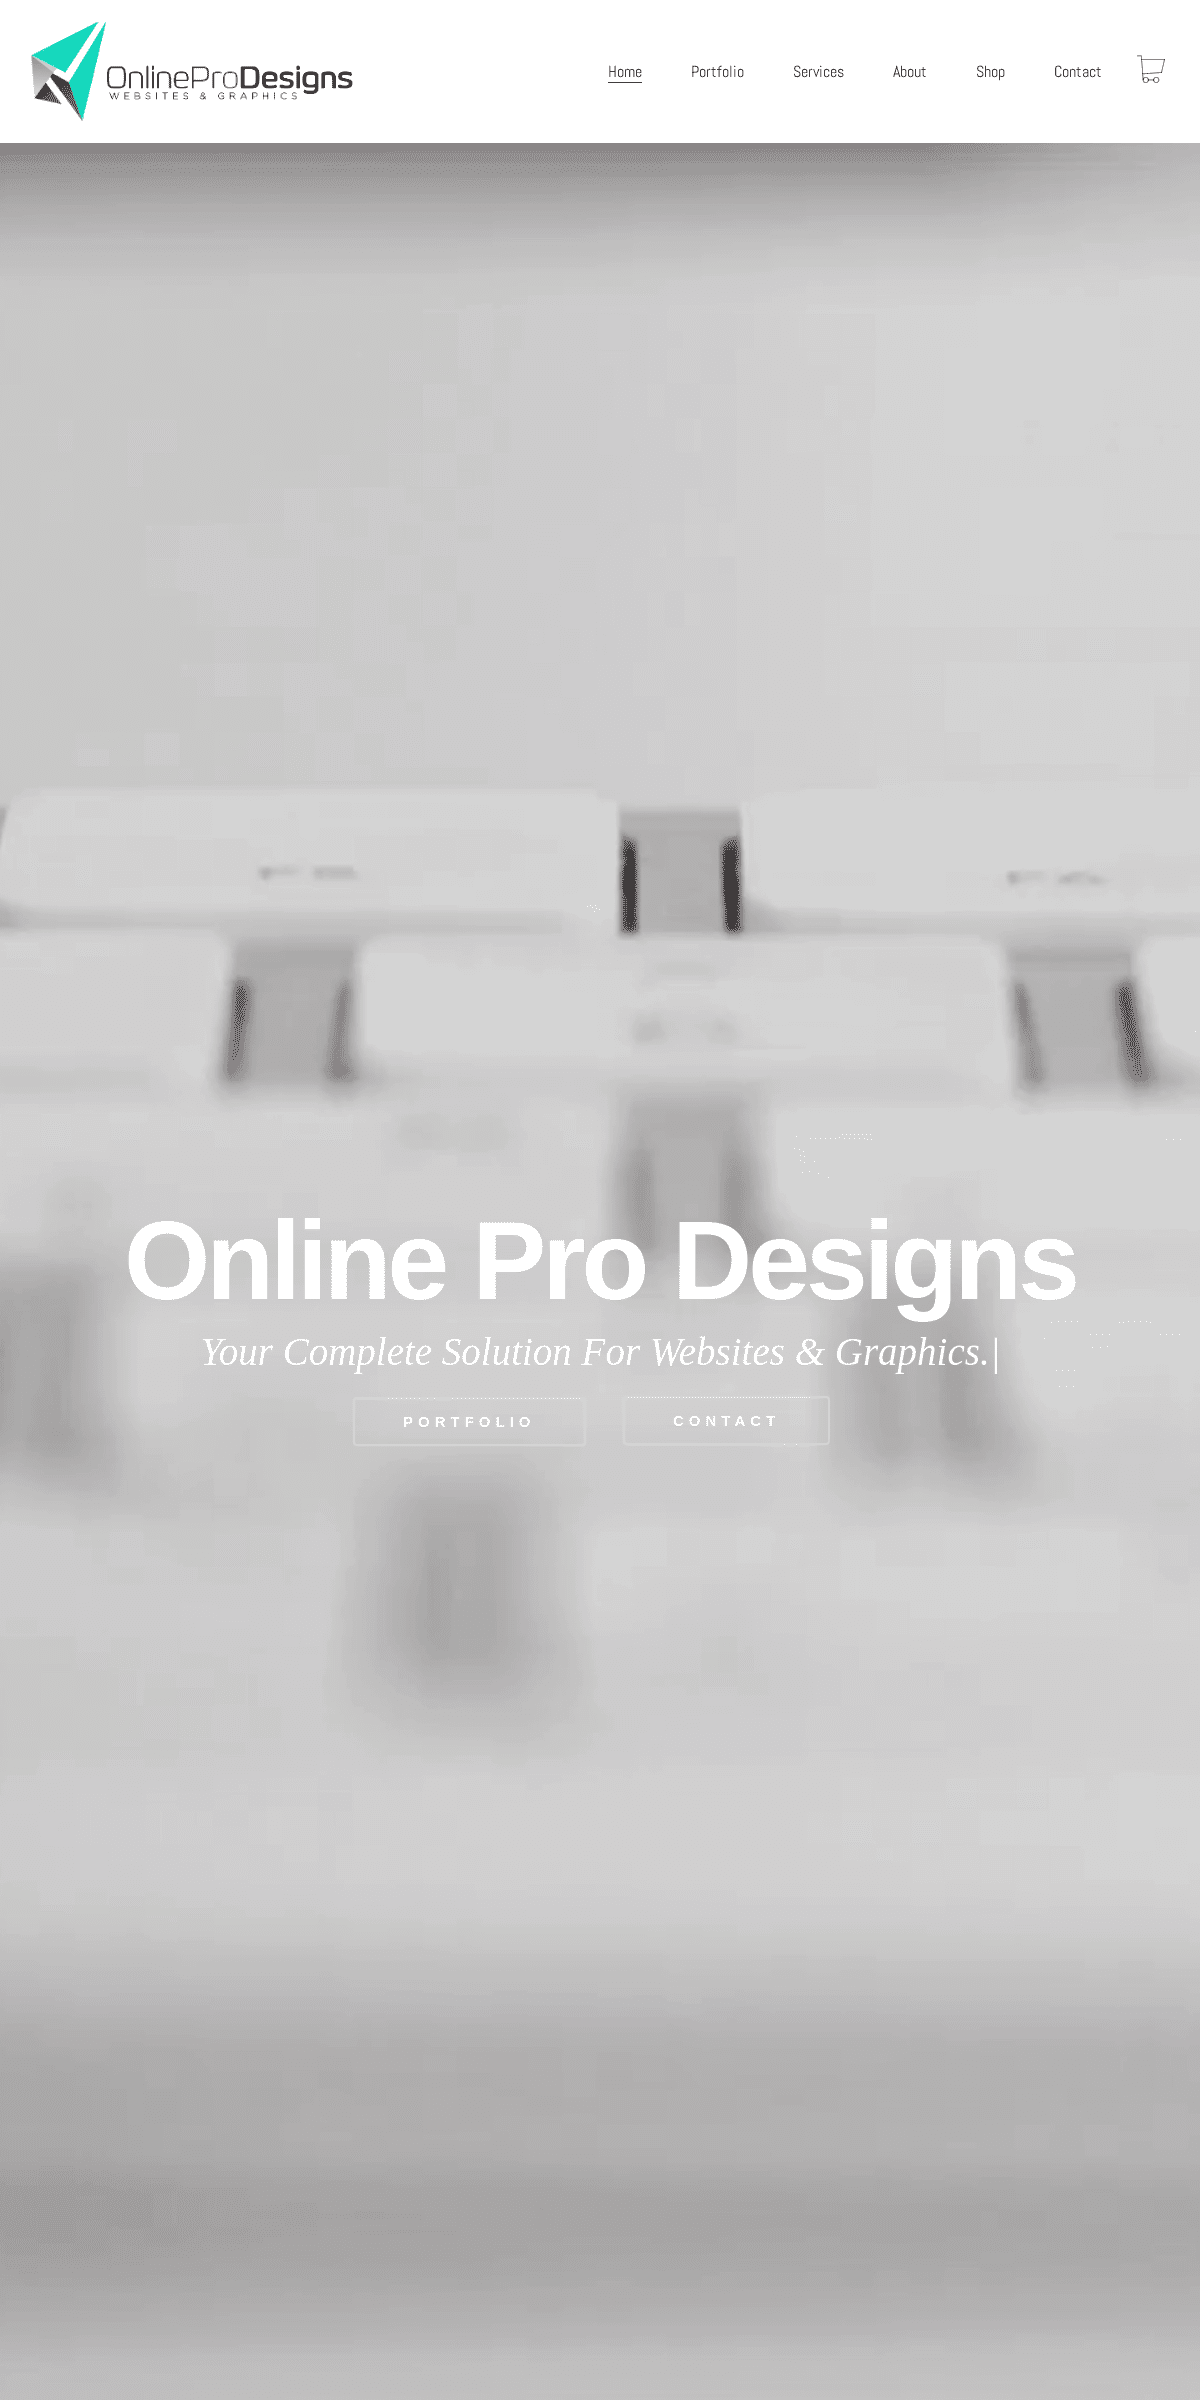 A complete backup of onlineprodesigns.com